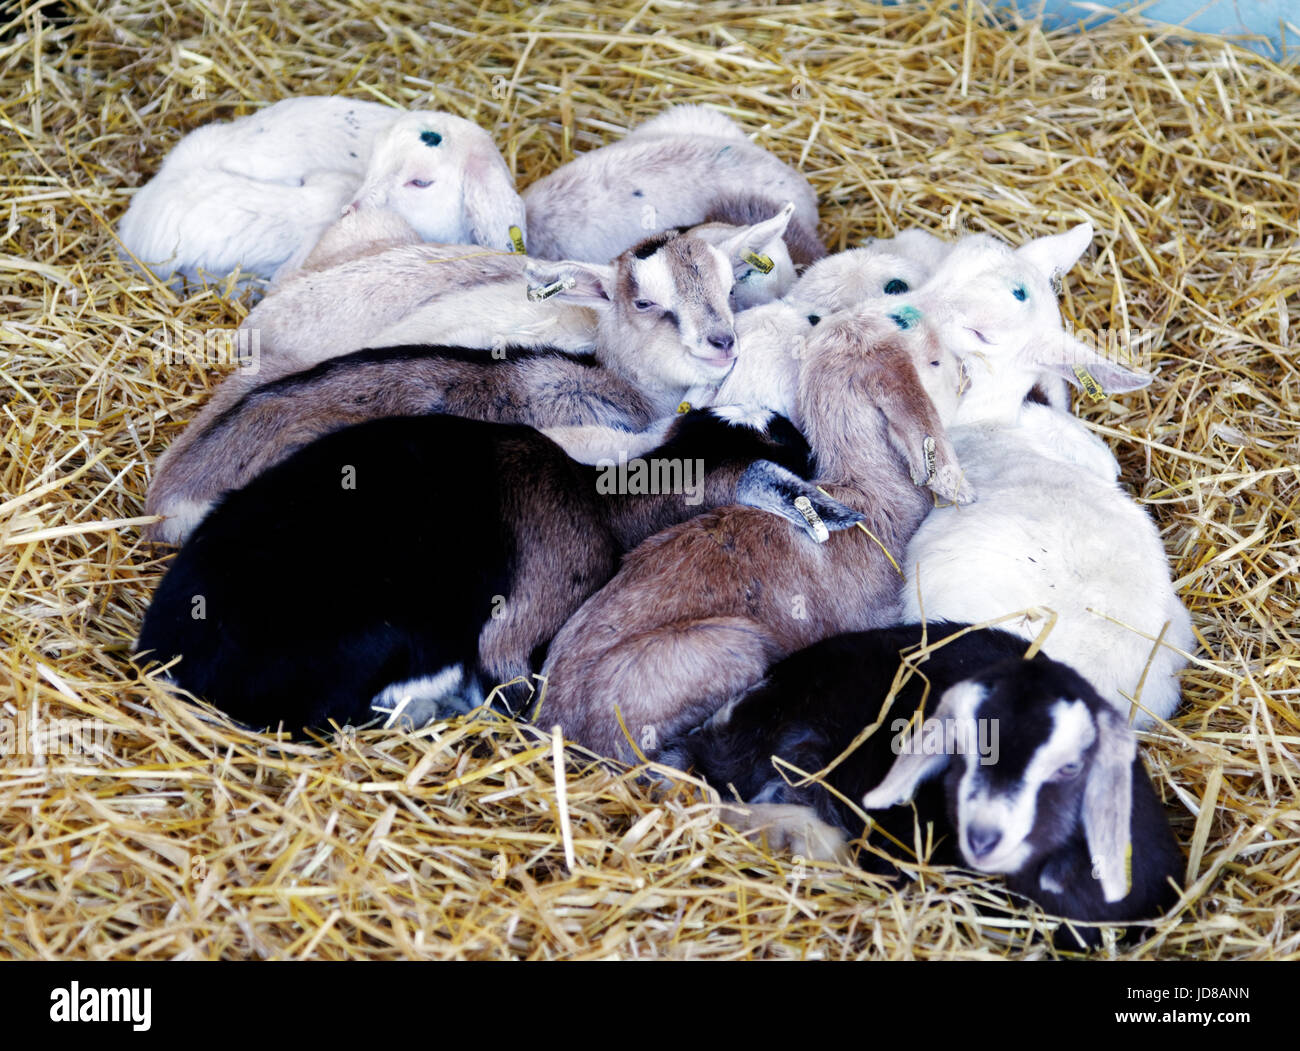 Baby goats all huddled together Stock Photo